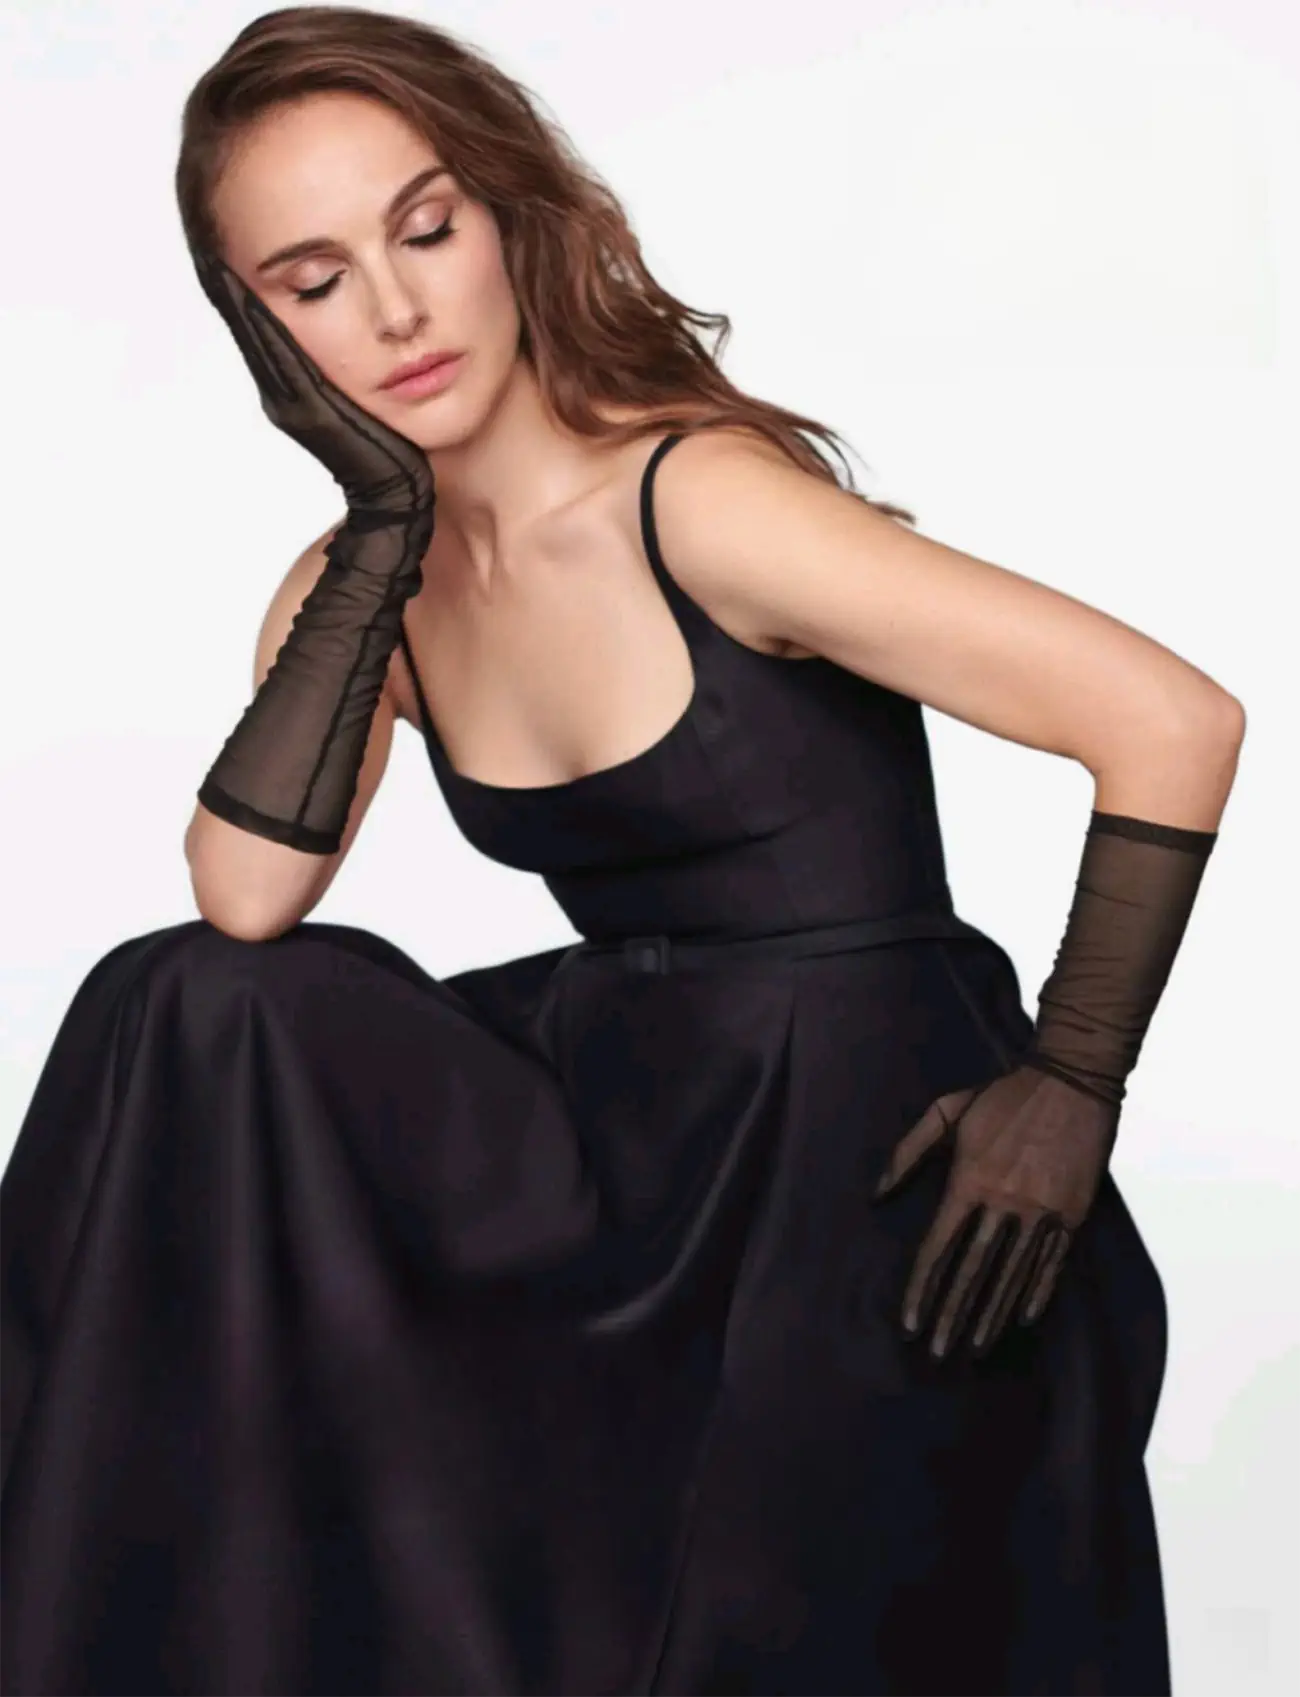 Natalie Portman in Dior on Elle France January 18th, 2024 by Felix Cooper